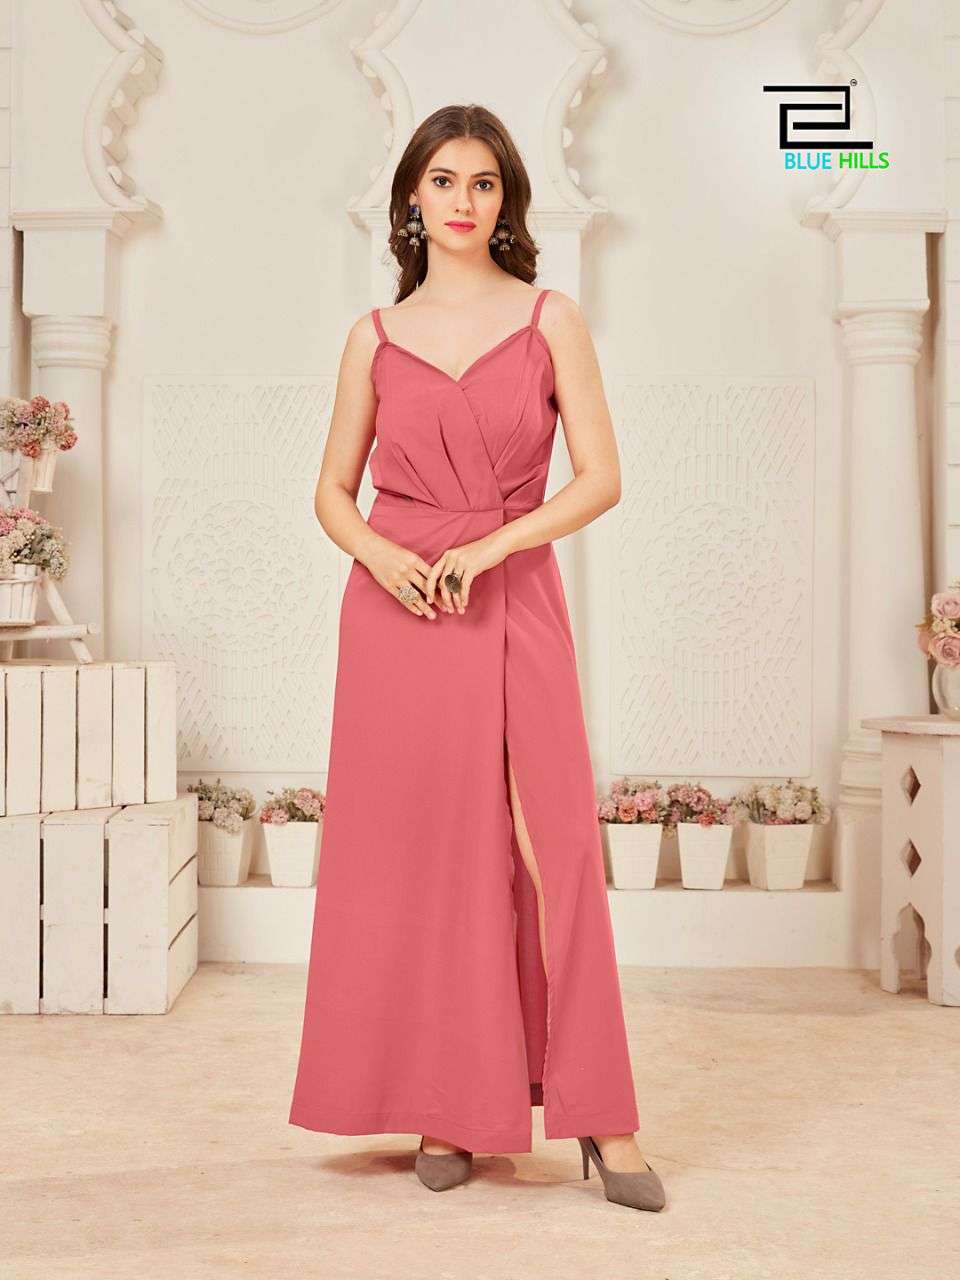 bluehills london beauty 1001-1005 series fancy western gown collection